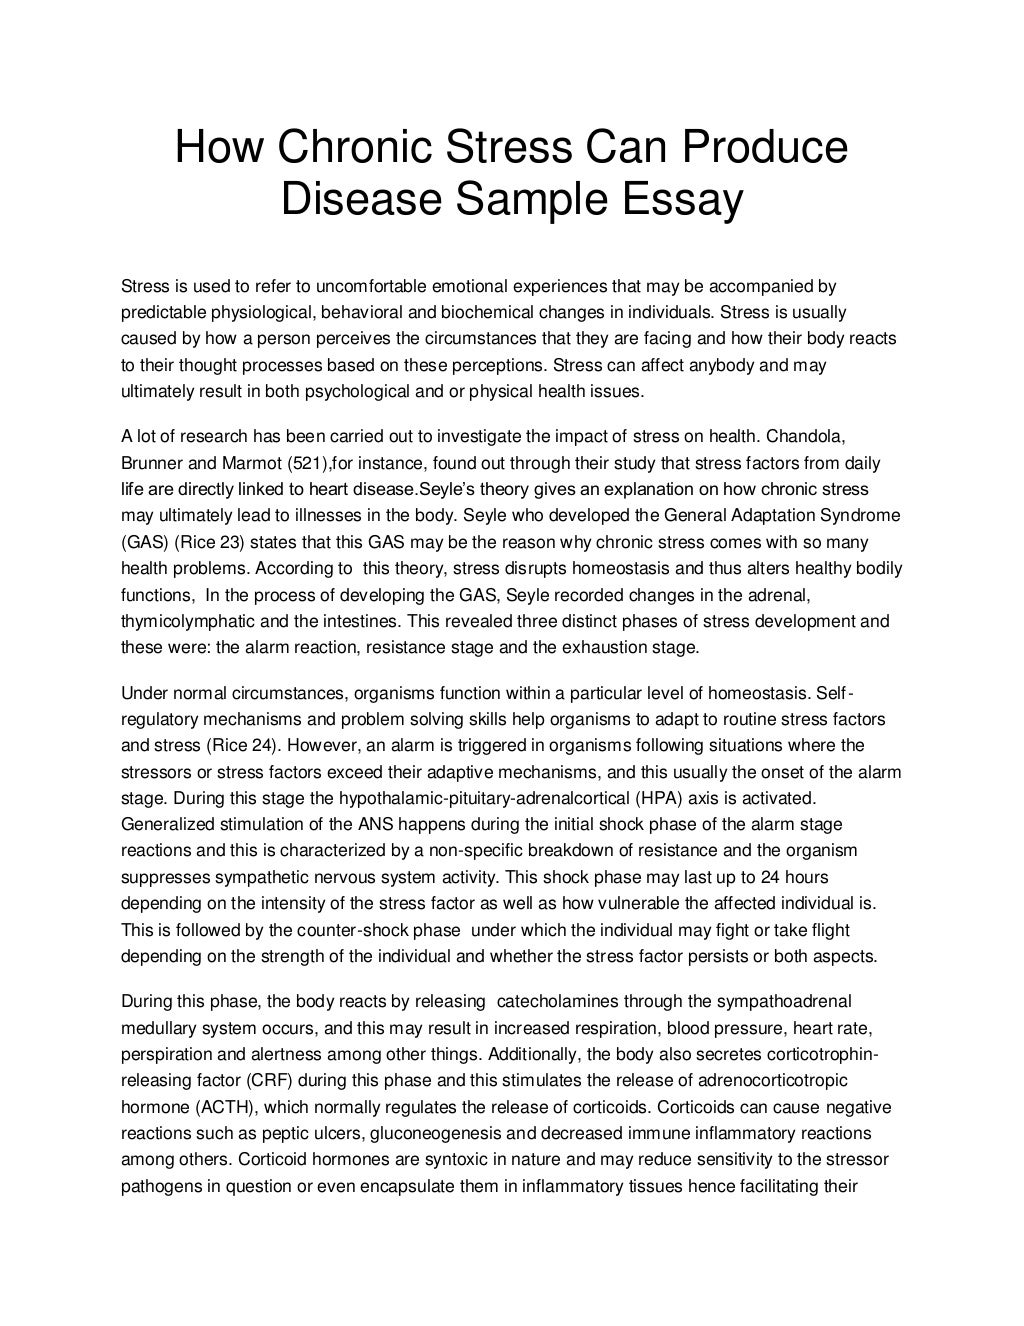 introduction for disease essay